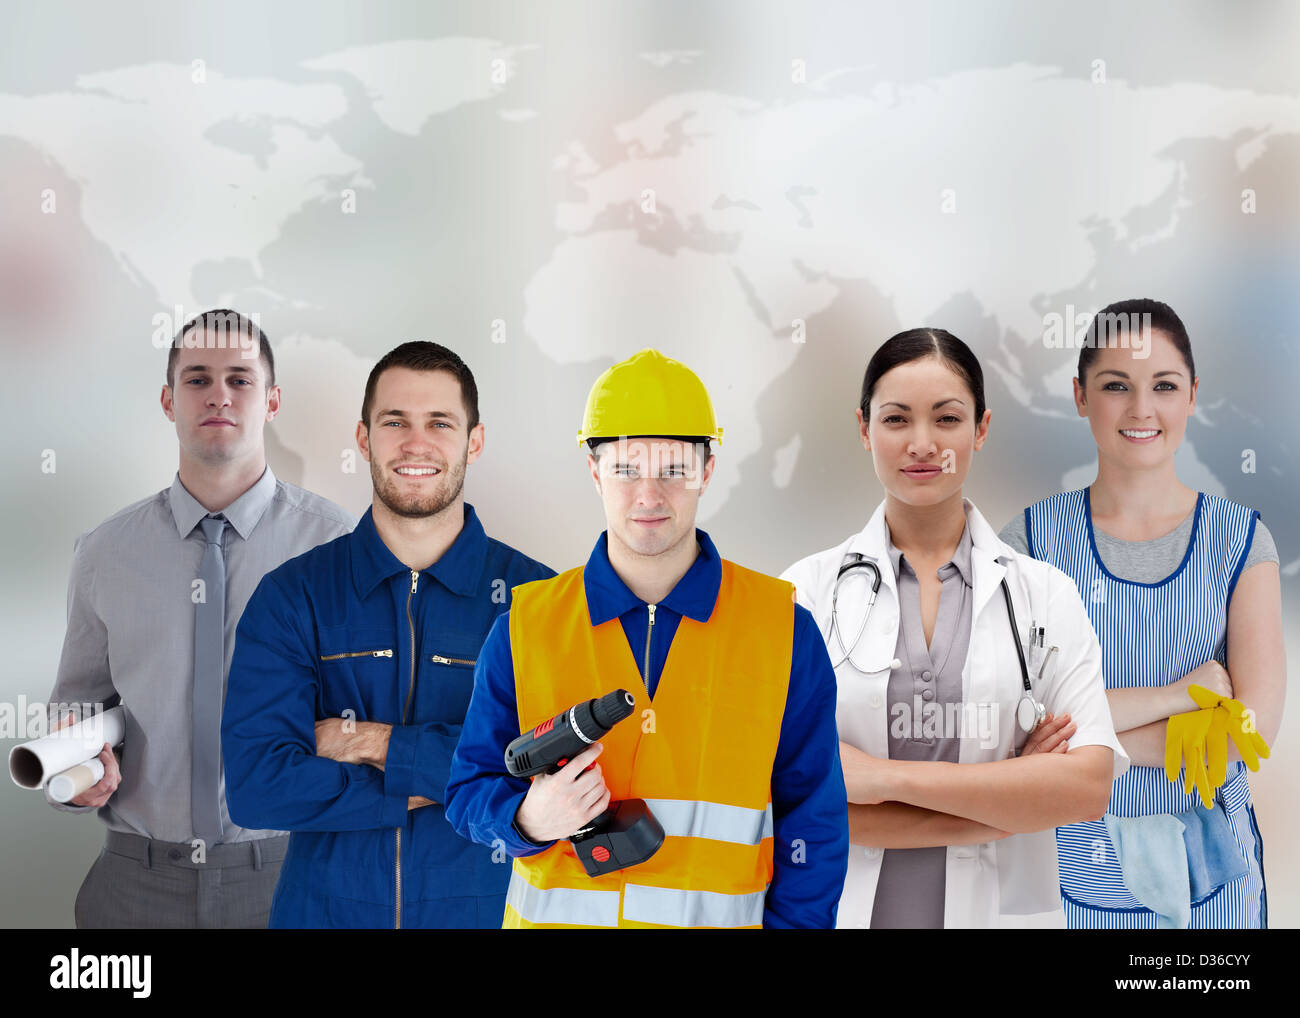 Five workers of different industries Stock Photo